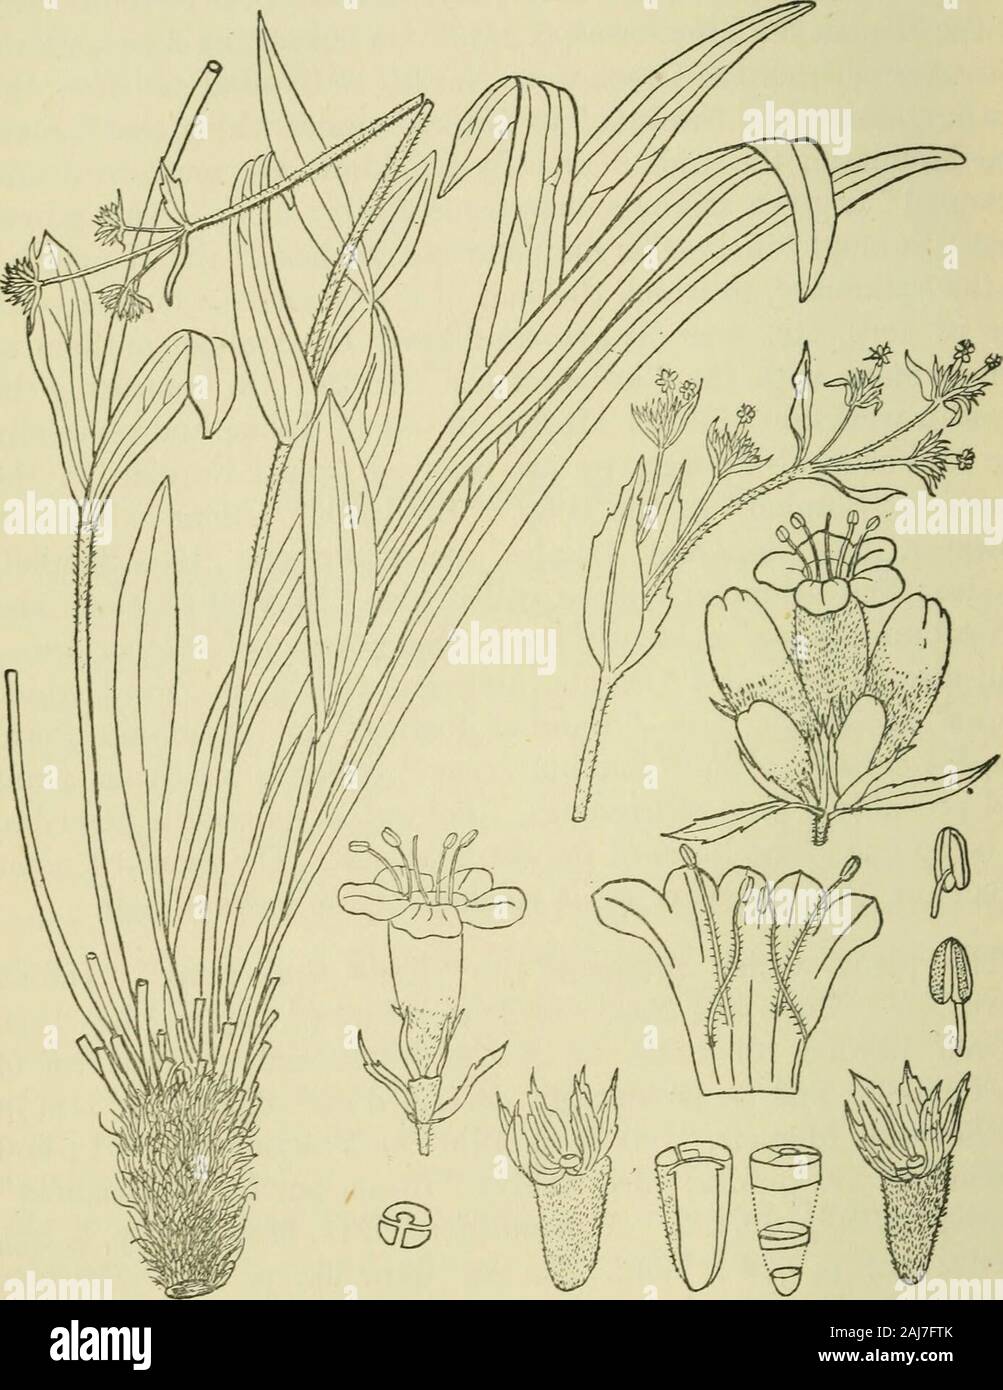 Odorographia : a natural history of raw materials and drugs used in the perfume industry : intended to serve growers, manufacturers and consumers . ndianNard or Mountain I^ard of Dioscorides (i., cap. vi.) has beenproved beyond all doubt to be the Nardostachys Jatamansi ofDe Candolle, and is botanically described and figured by him inhis Seventh Memoir, Sur la famille des Yalerian^es, t. 1; andProdomus, iv., p. 624 ; also Chatin, Etude sur les Valerian^es (Paris, 1872), p. 69, t. 2. K grandiflora, D.O., Mem., 1. c. p. 8, t. 2,Prodr., iv., p. 624 ; Wall. PL, As. Ear., iii., p. 40. PcdriniaJatam Stock Photo